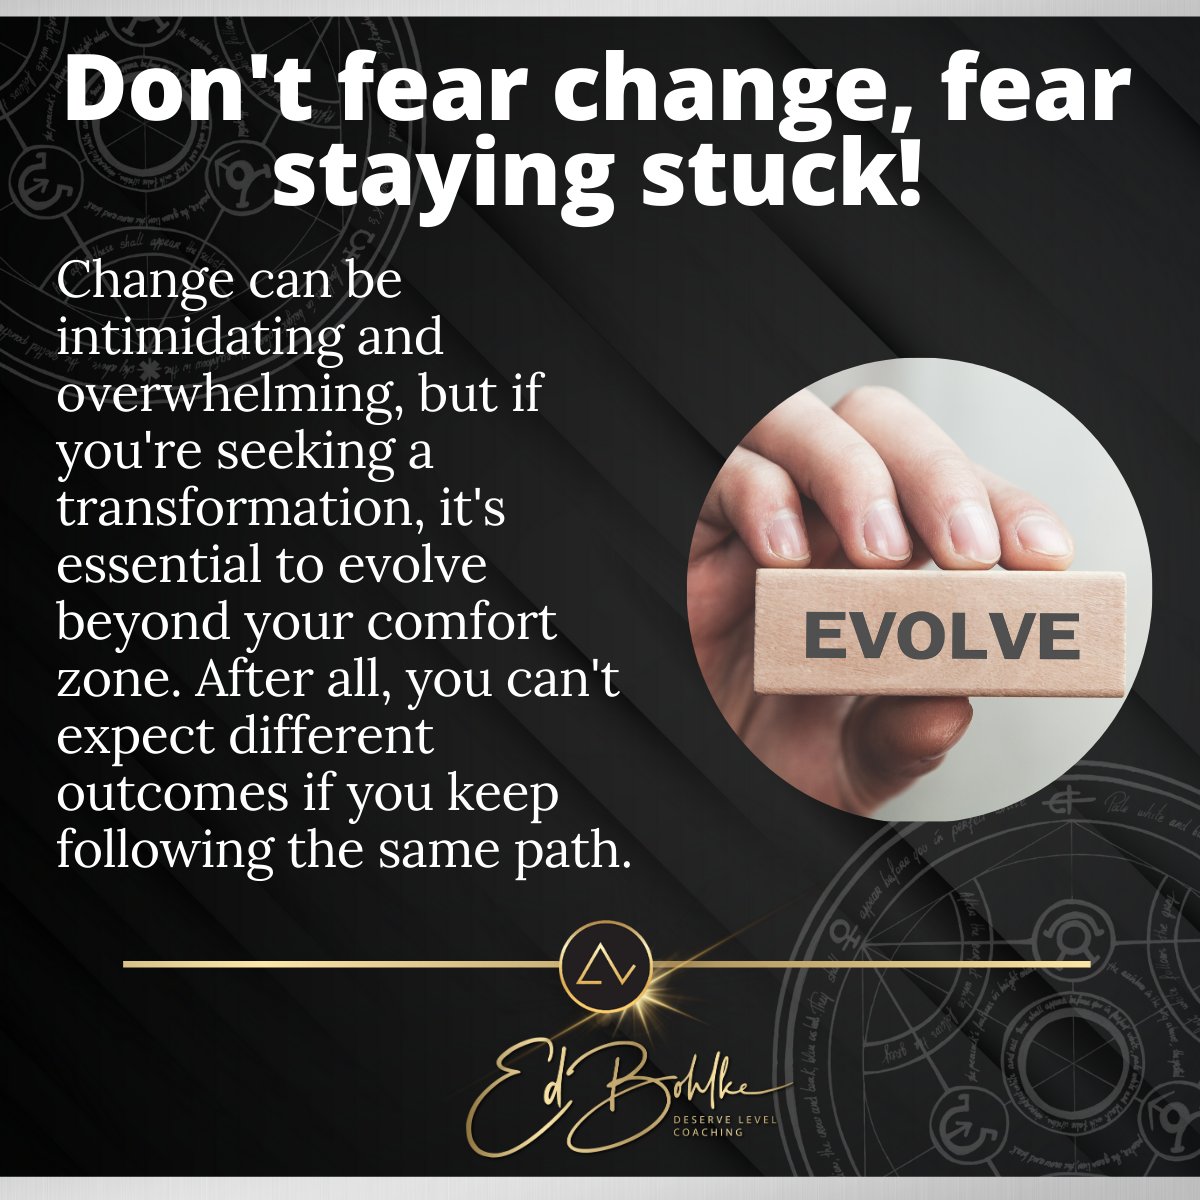 Change can be scary, but do you know what's scarier? Staying stuck, unevolved, and without growth. #PerformanceCoach #FullPotential #ComfortZone #SelfRealization #SelfImprovement #Success #Evolution #Learning #Growth #RadicalResults